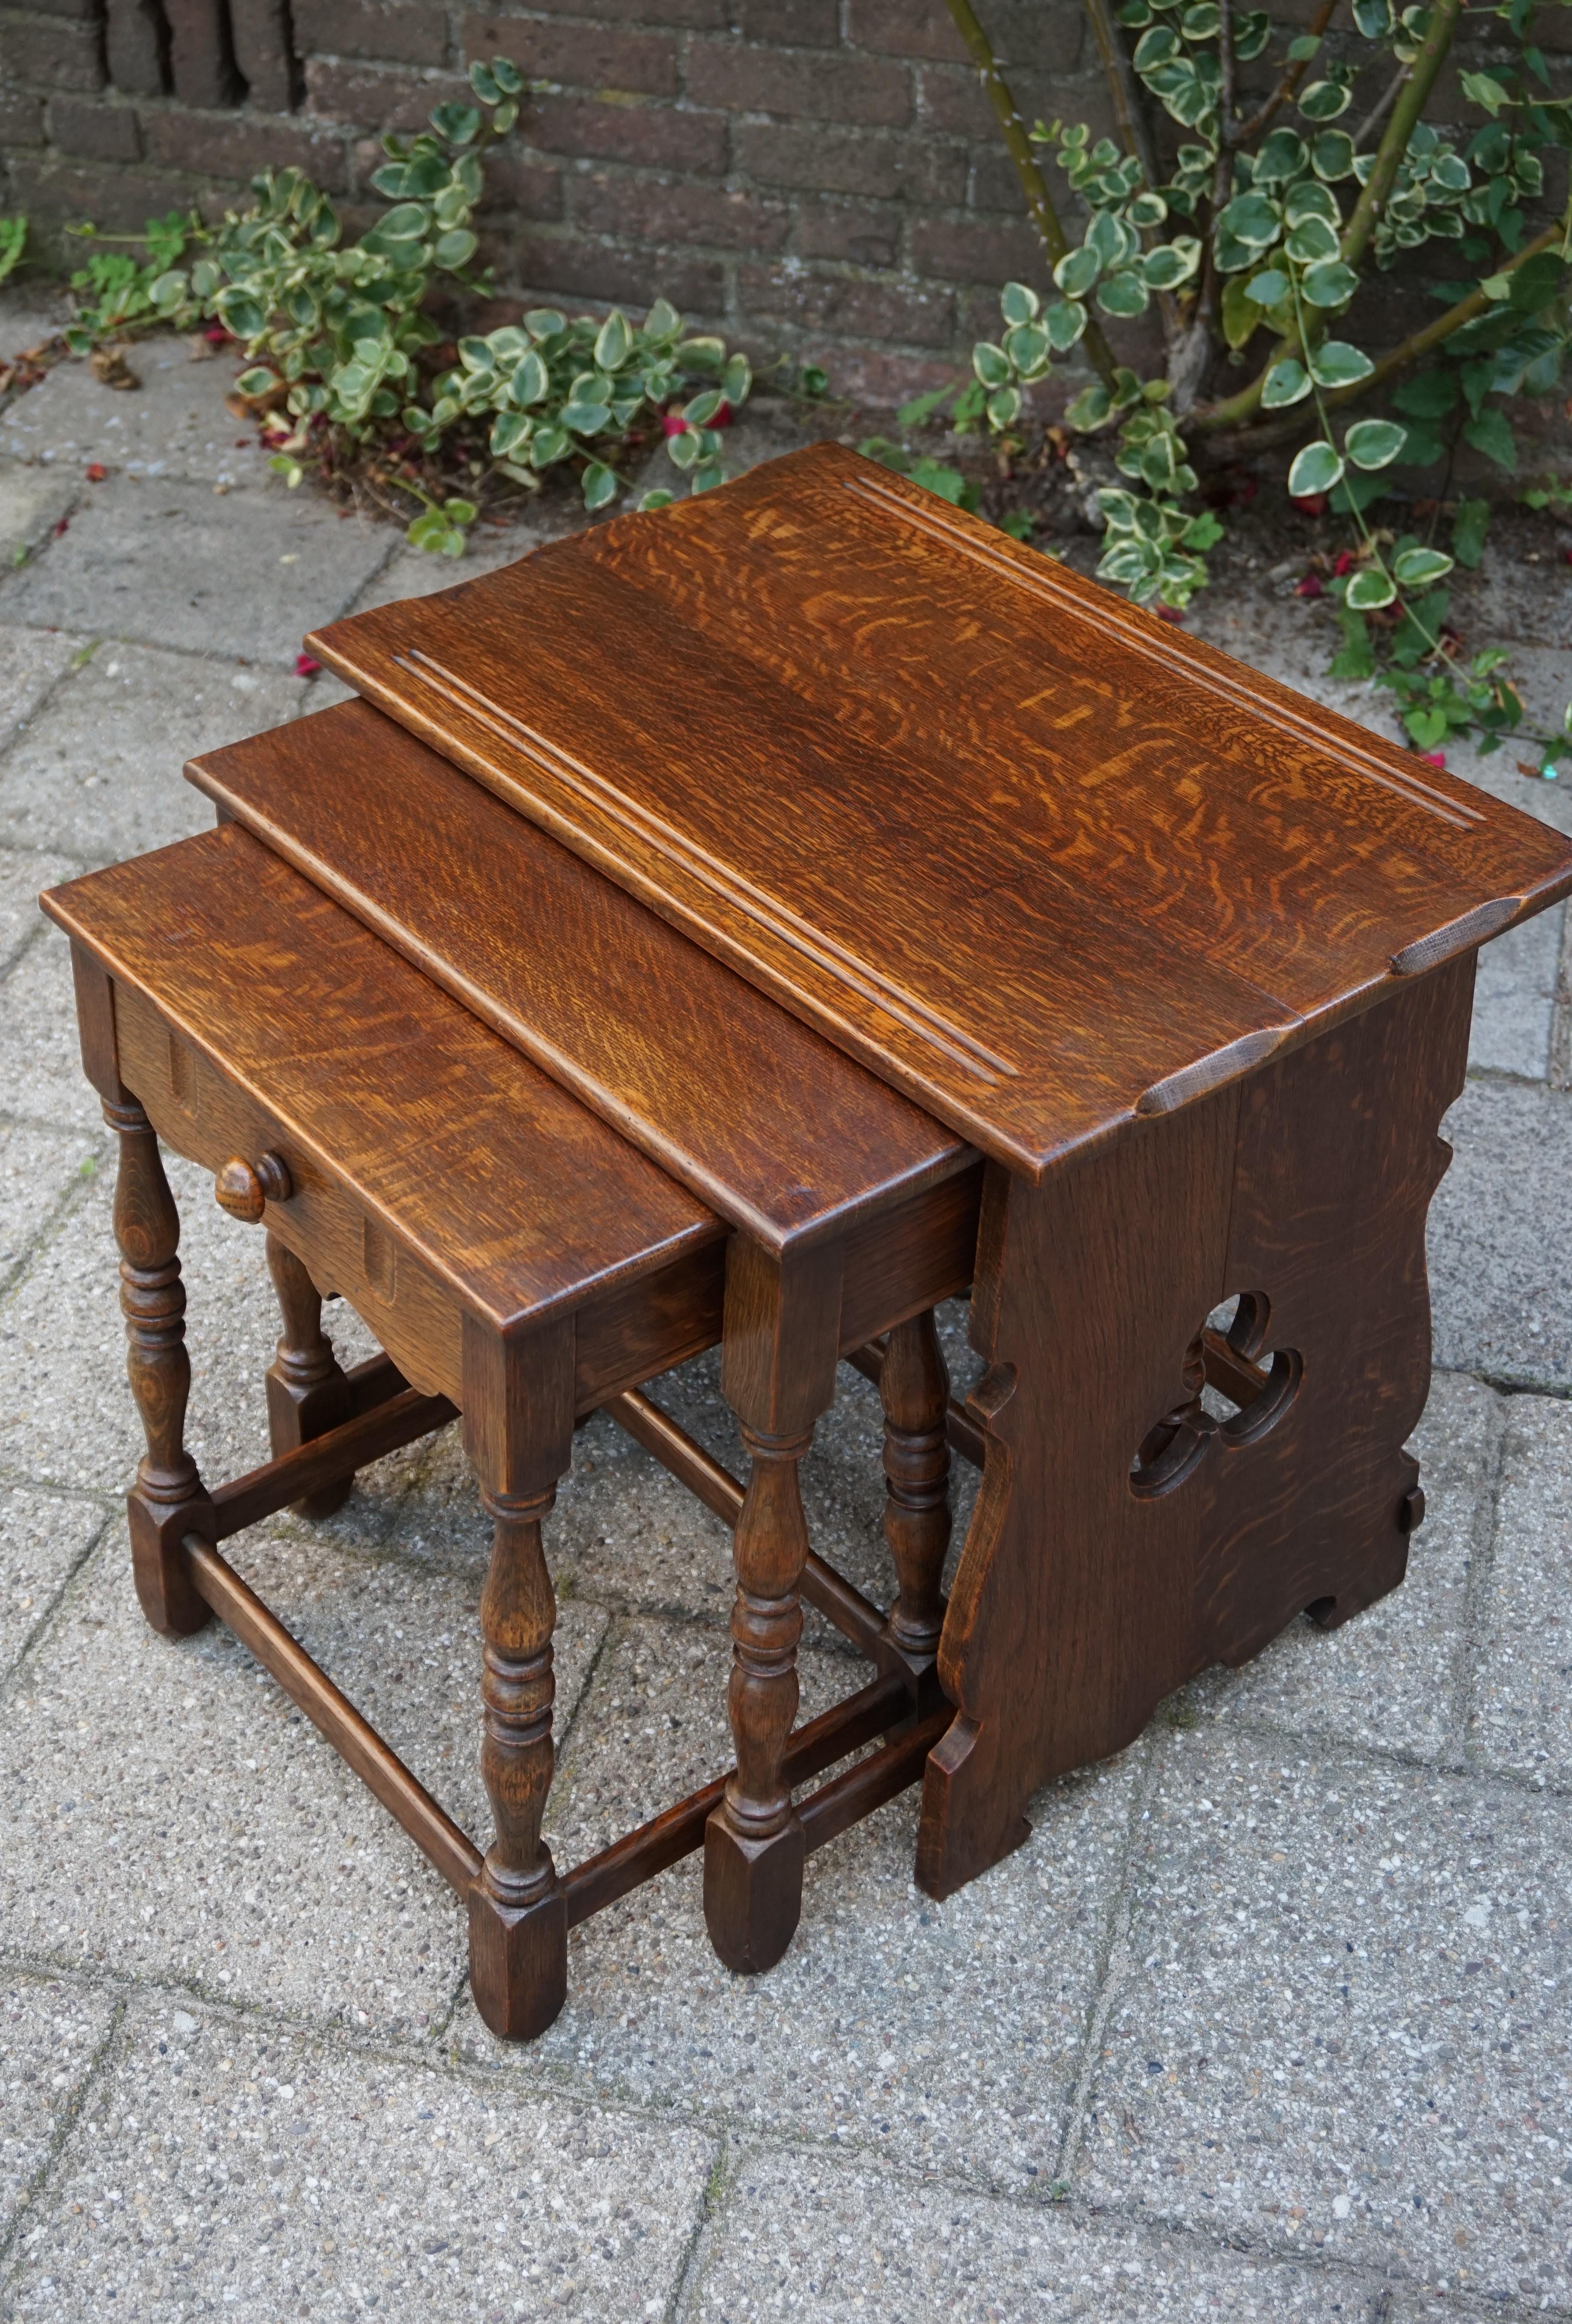 Dutch Early 20th Century Handcrafted Gothic Revival Nest of Tables from a Monastery